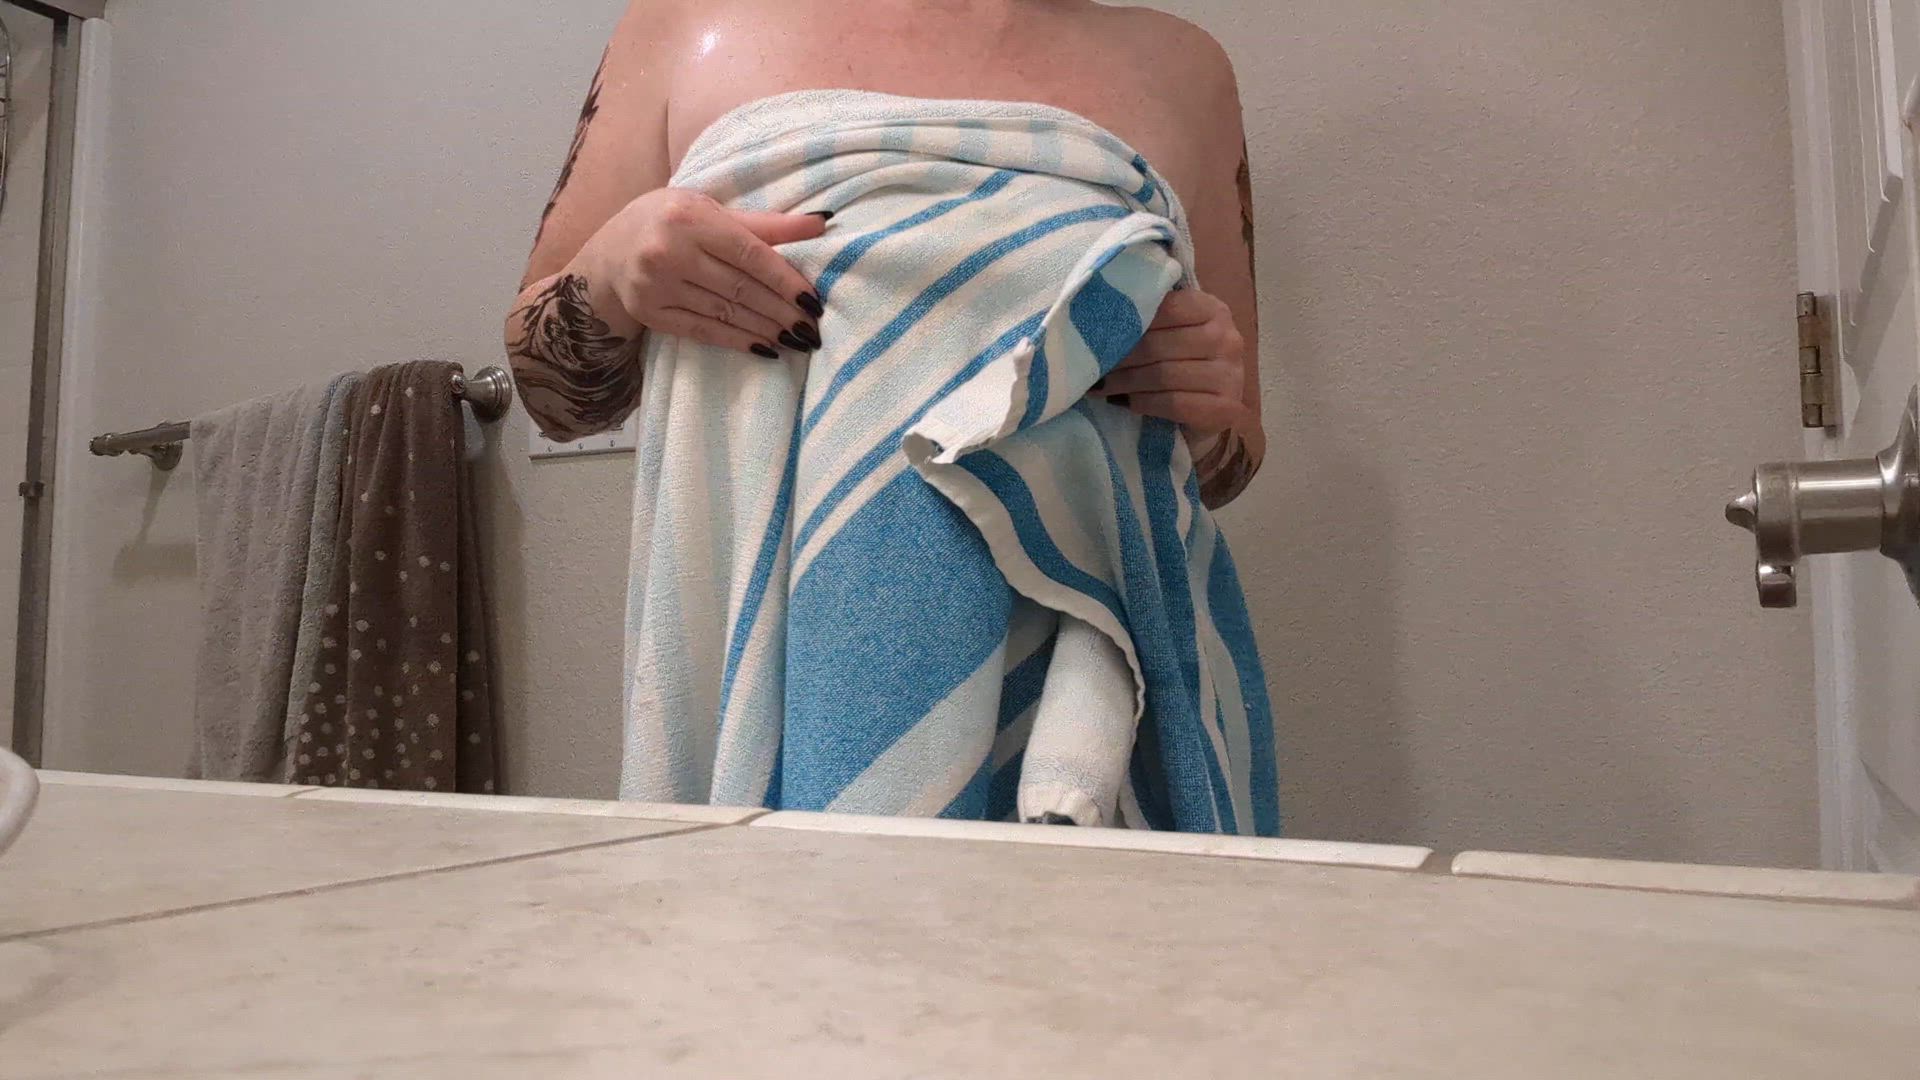 Shower porn video with onlyfans model aspriteinbloom <strong>@aspriteinbloom</strong>